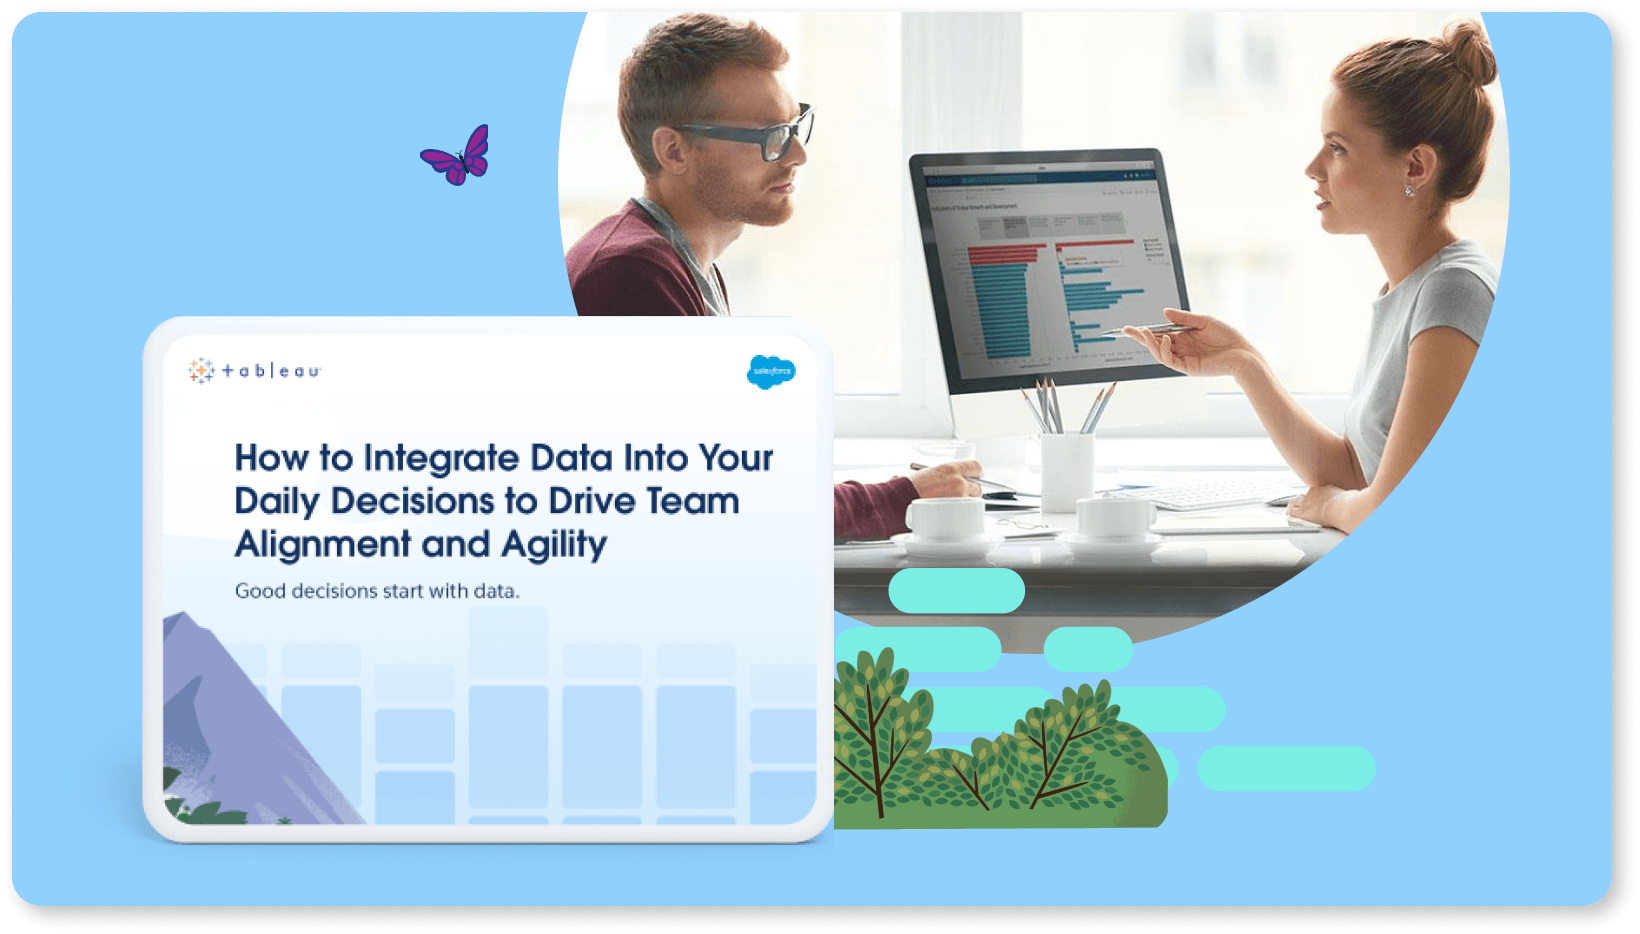 How to Integrate Data Into Your Daily Decisions to Drive Team Alignment and Agility로 이동